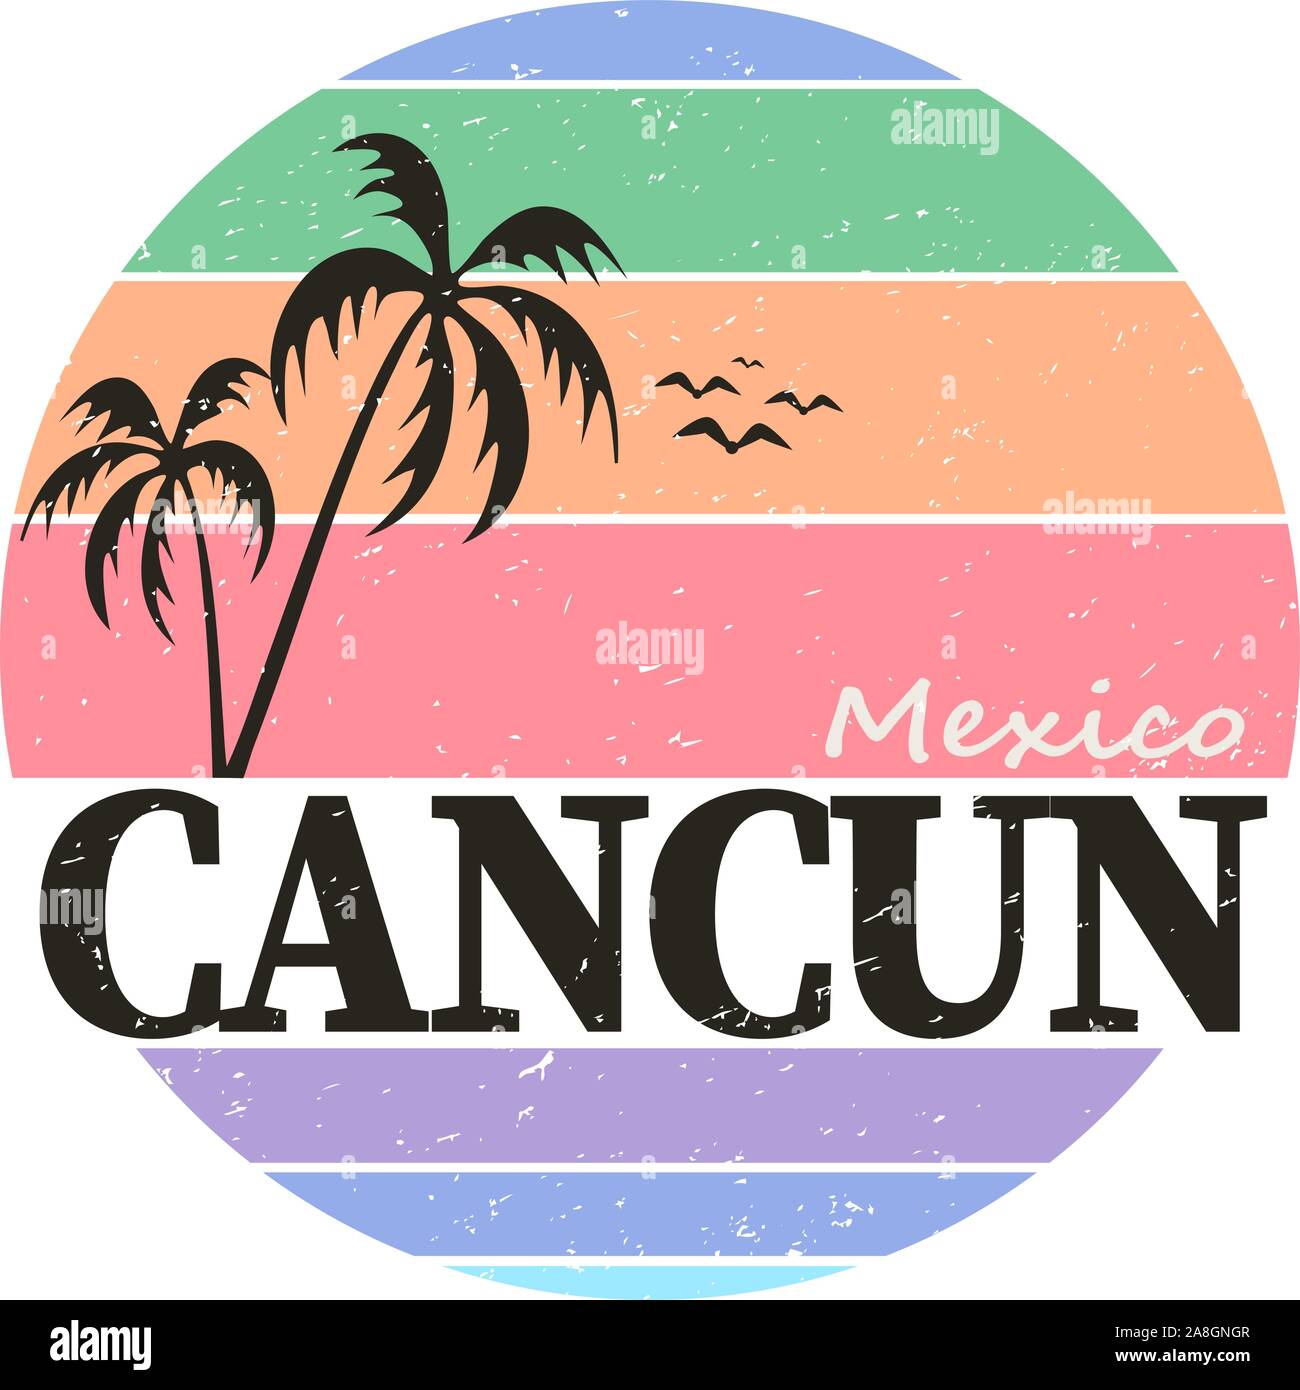 Grunge rubber stamp with text Cancun Mexico, vector illustration Stock Vector